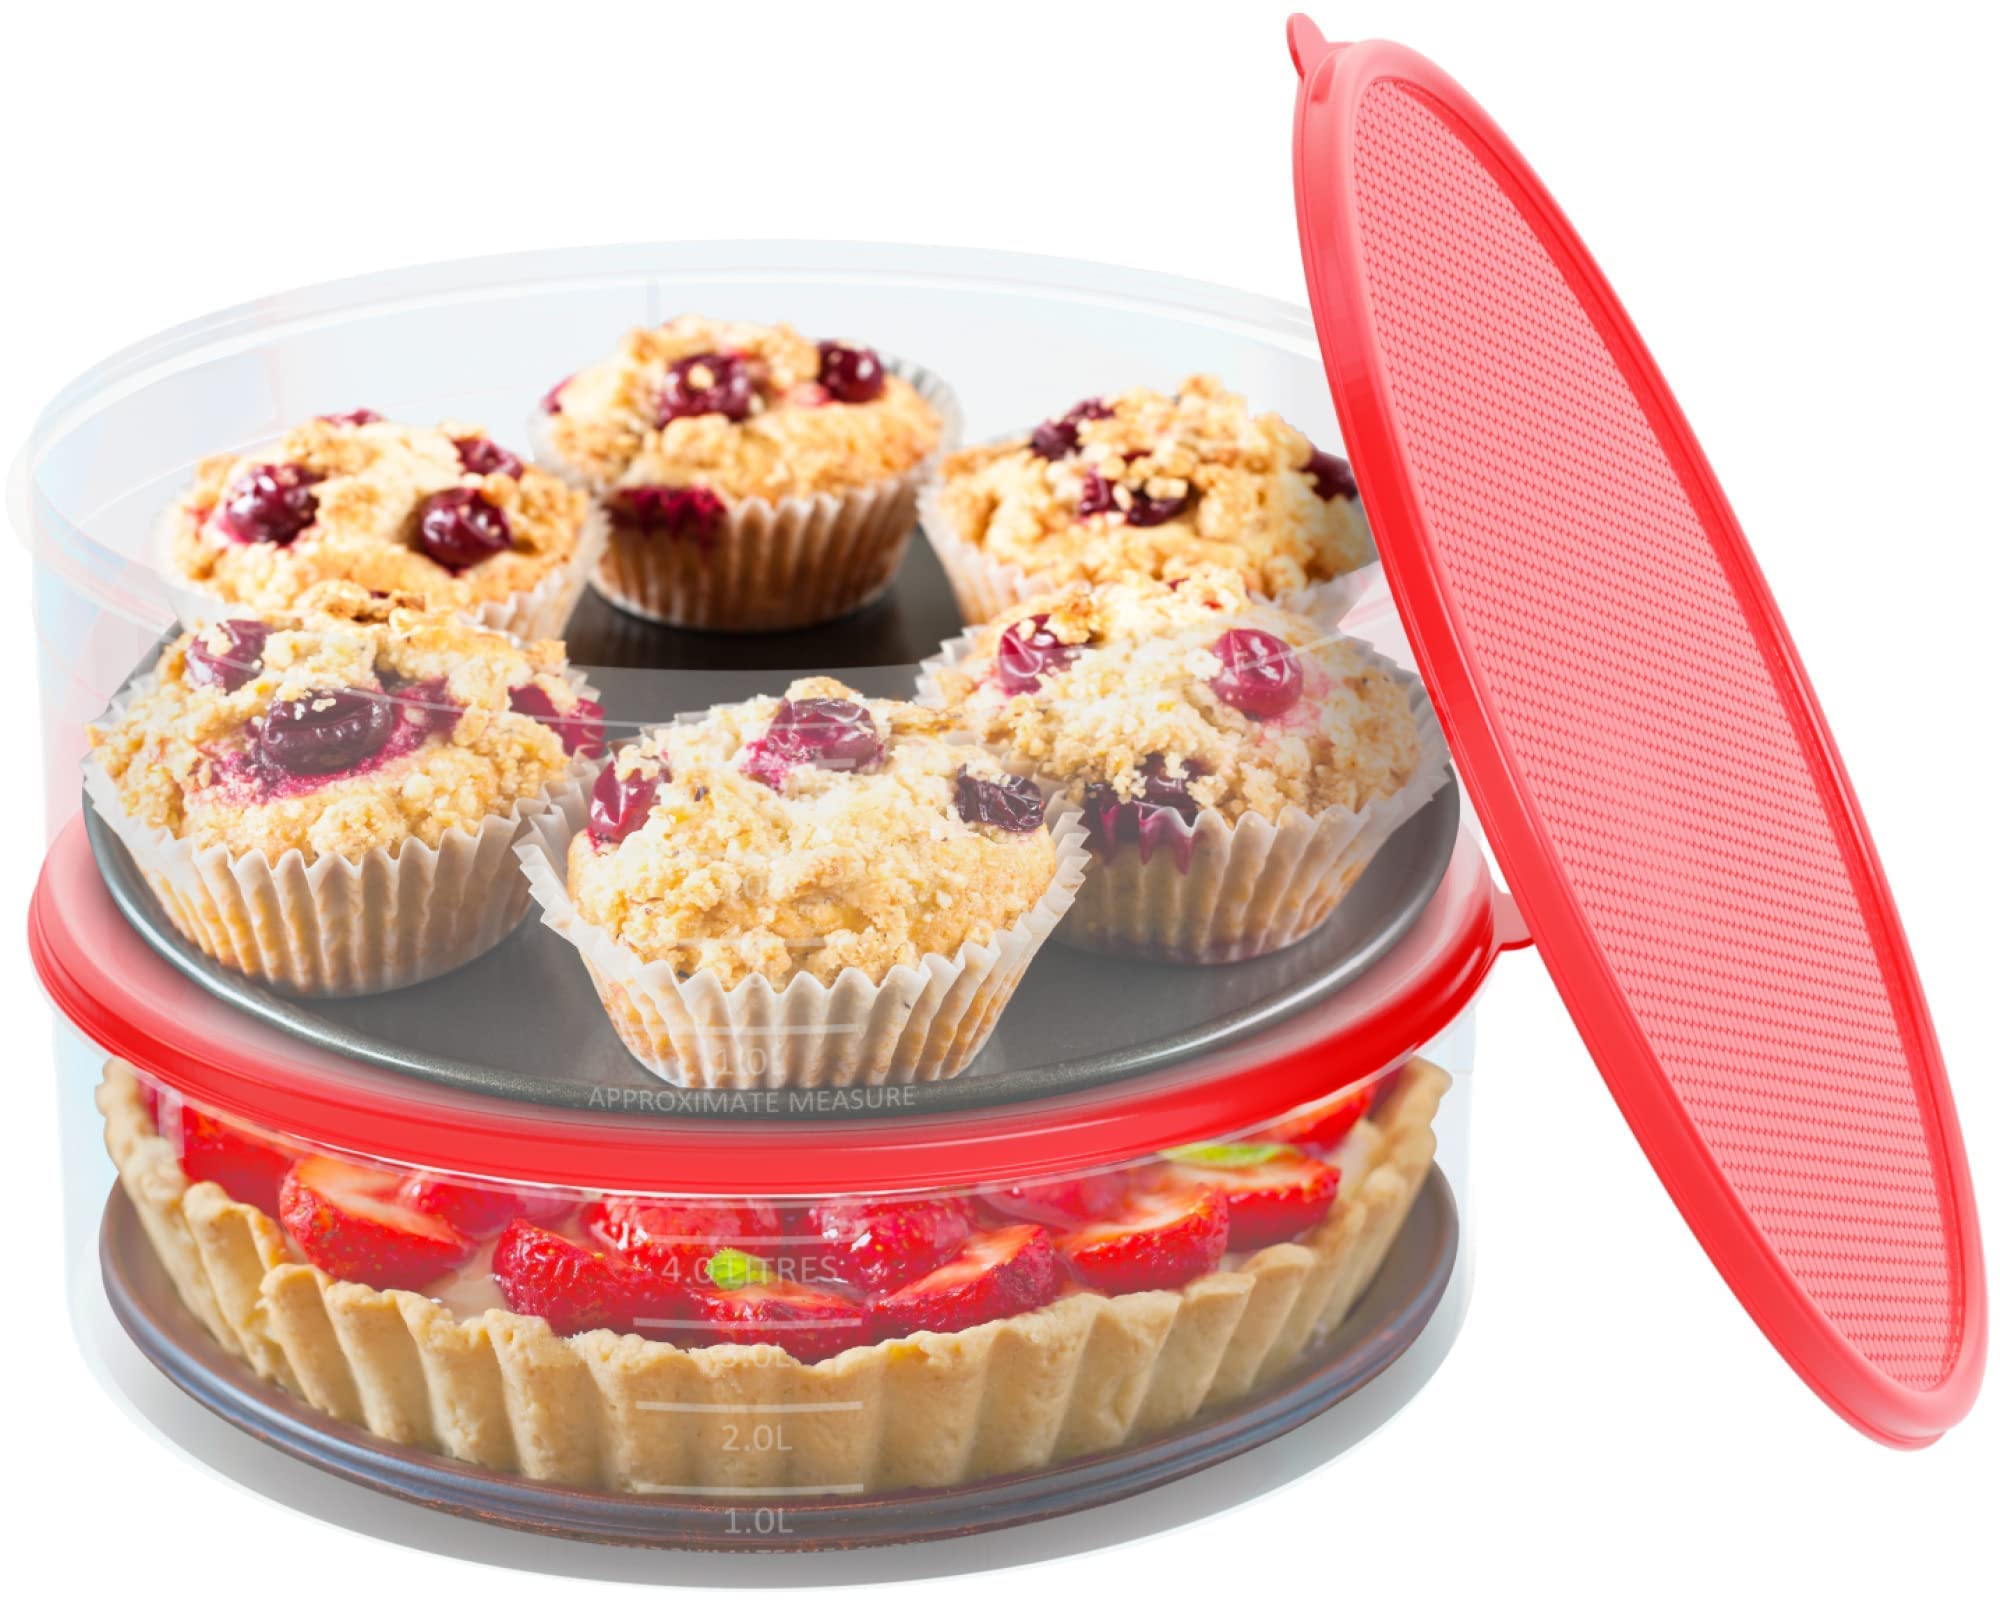 2 Pack Pie Carrier Cake Storage Container with Lid | 10.5" Large Round Clear Plastic Cupcake Cheesecake Muffin Flan Cookie Tortilla Holder Storage Containers Airtight | Pie Keeper Transport Container